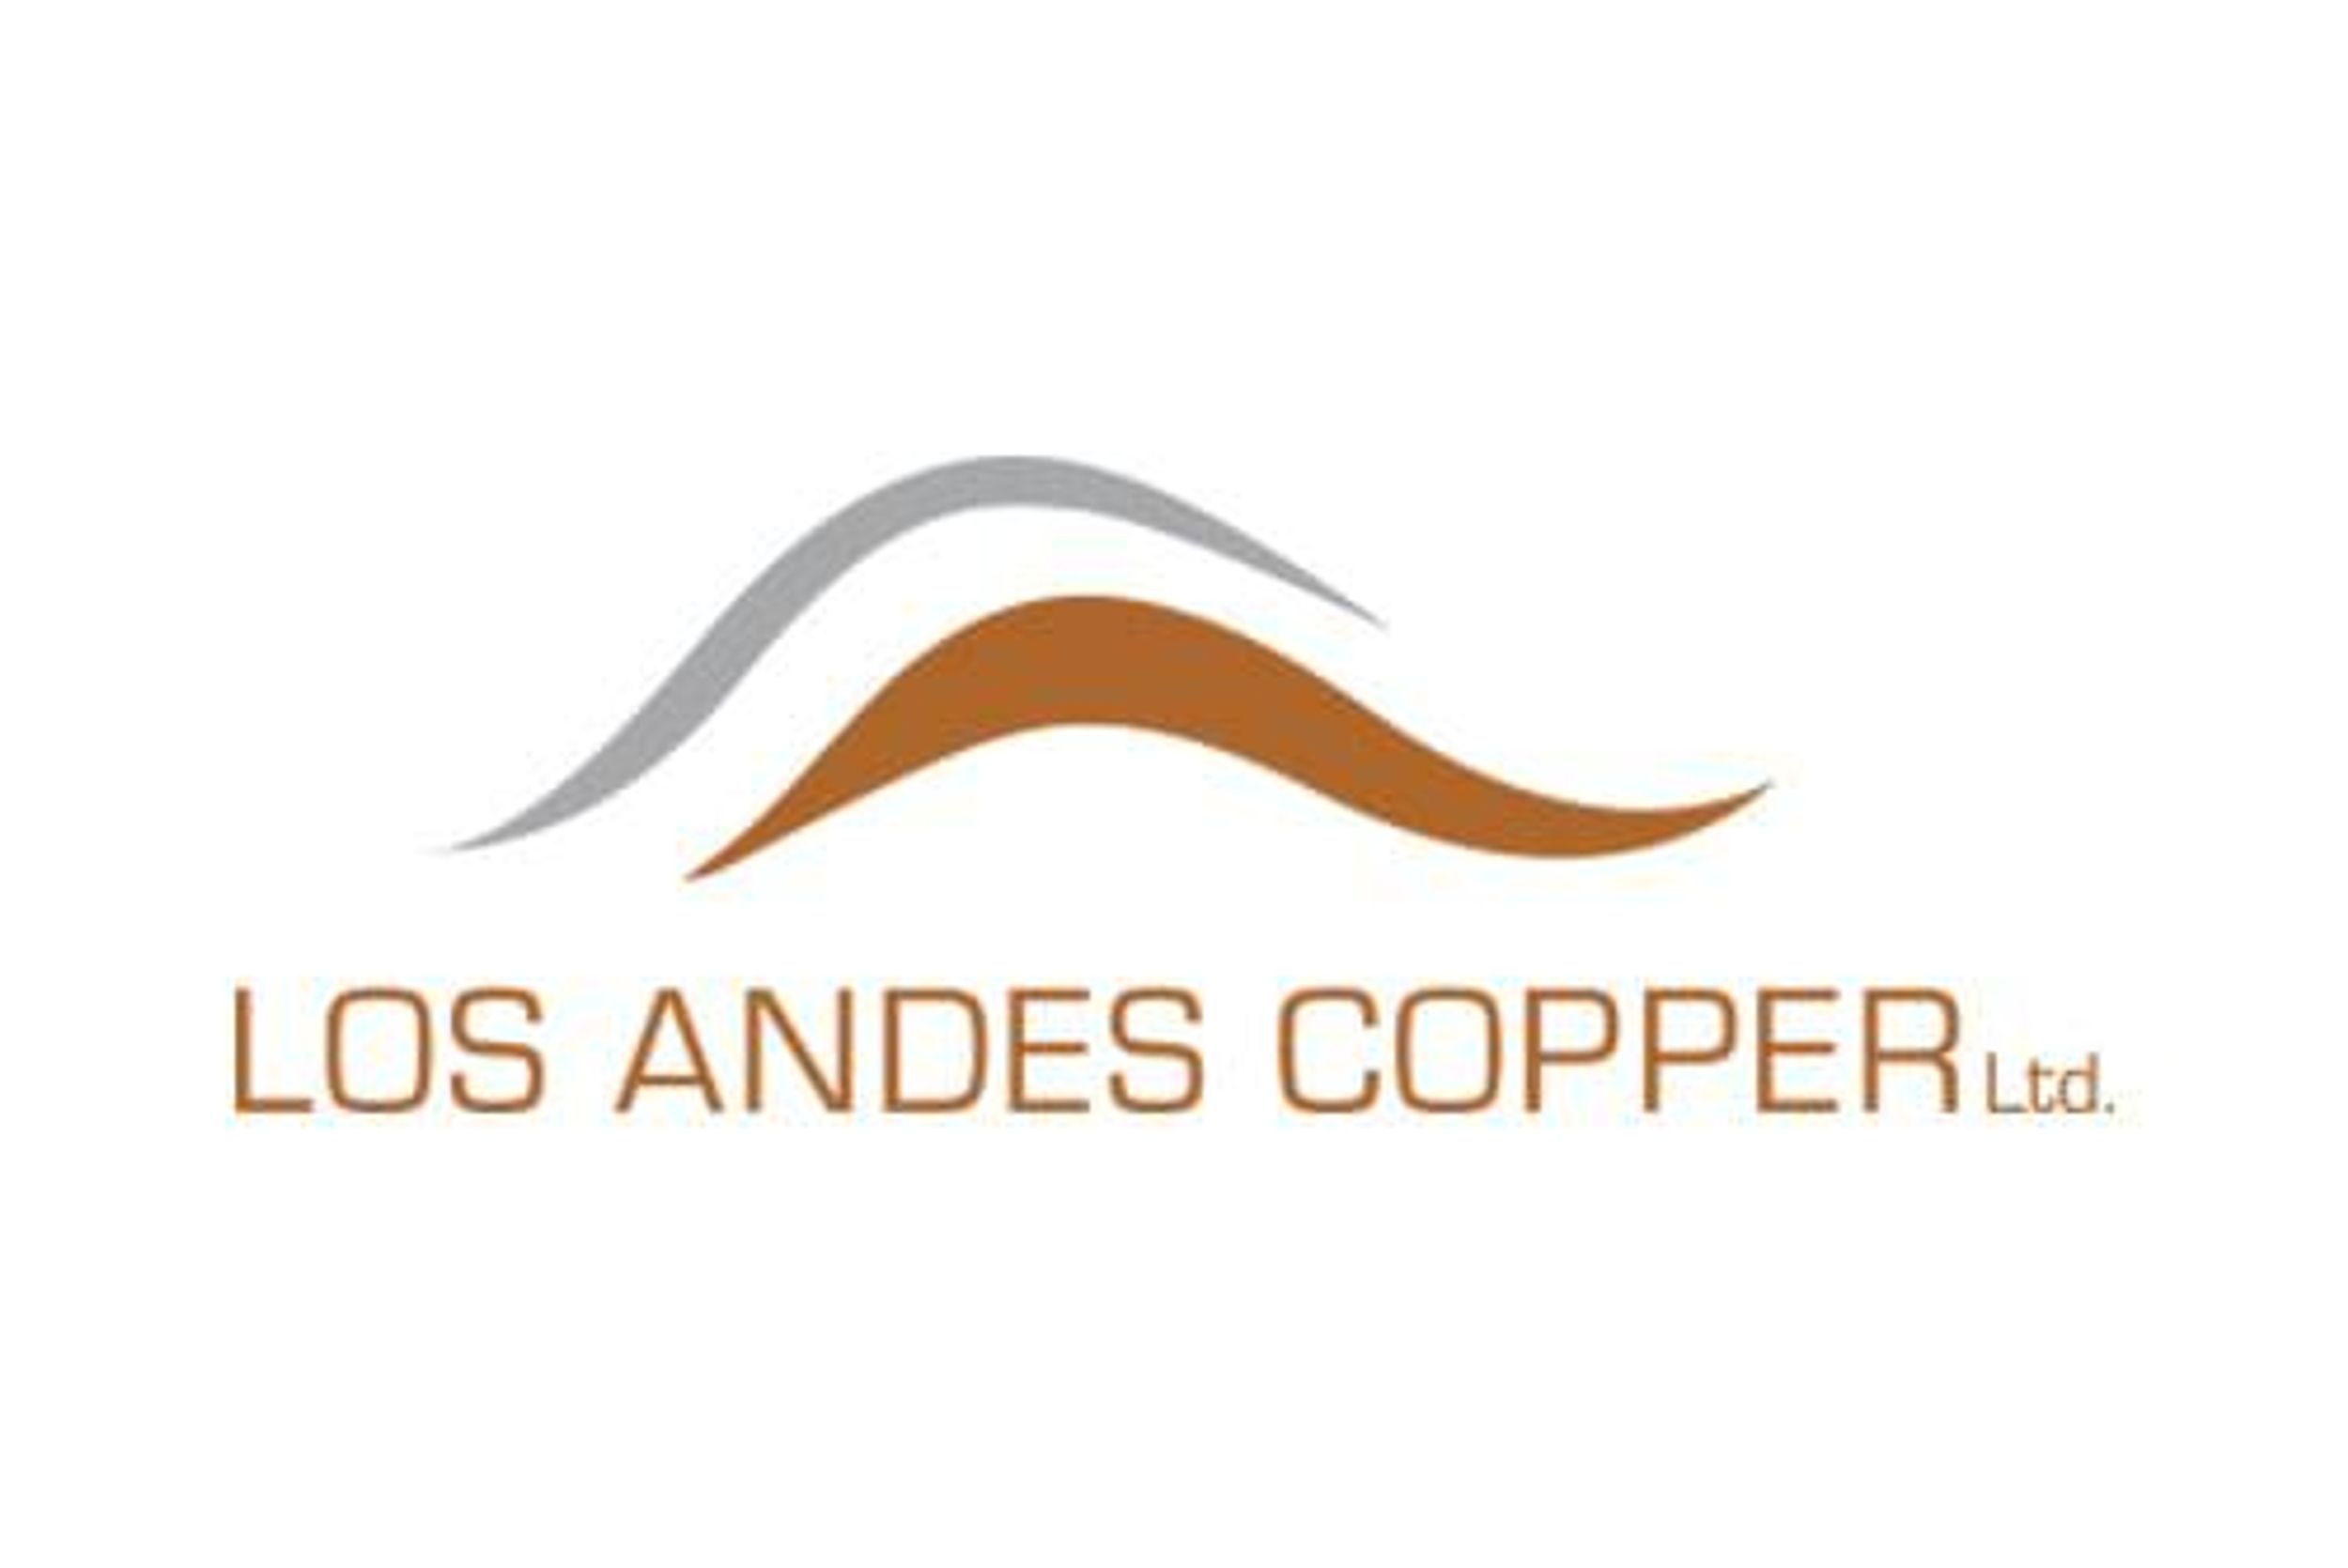 Los Andes Copper Announces Financial Results for the Year Ended September 30, 2021